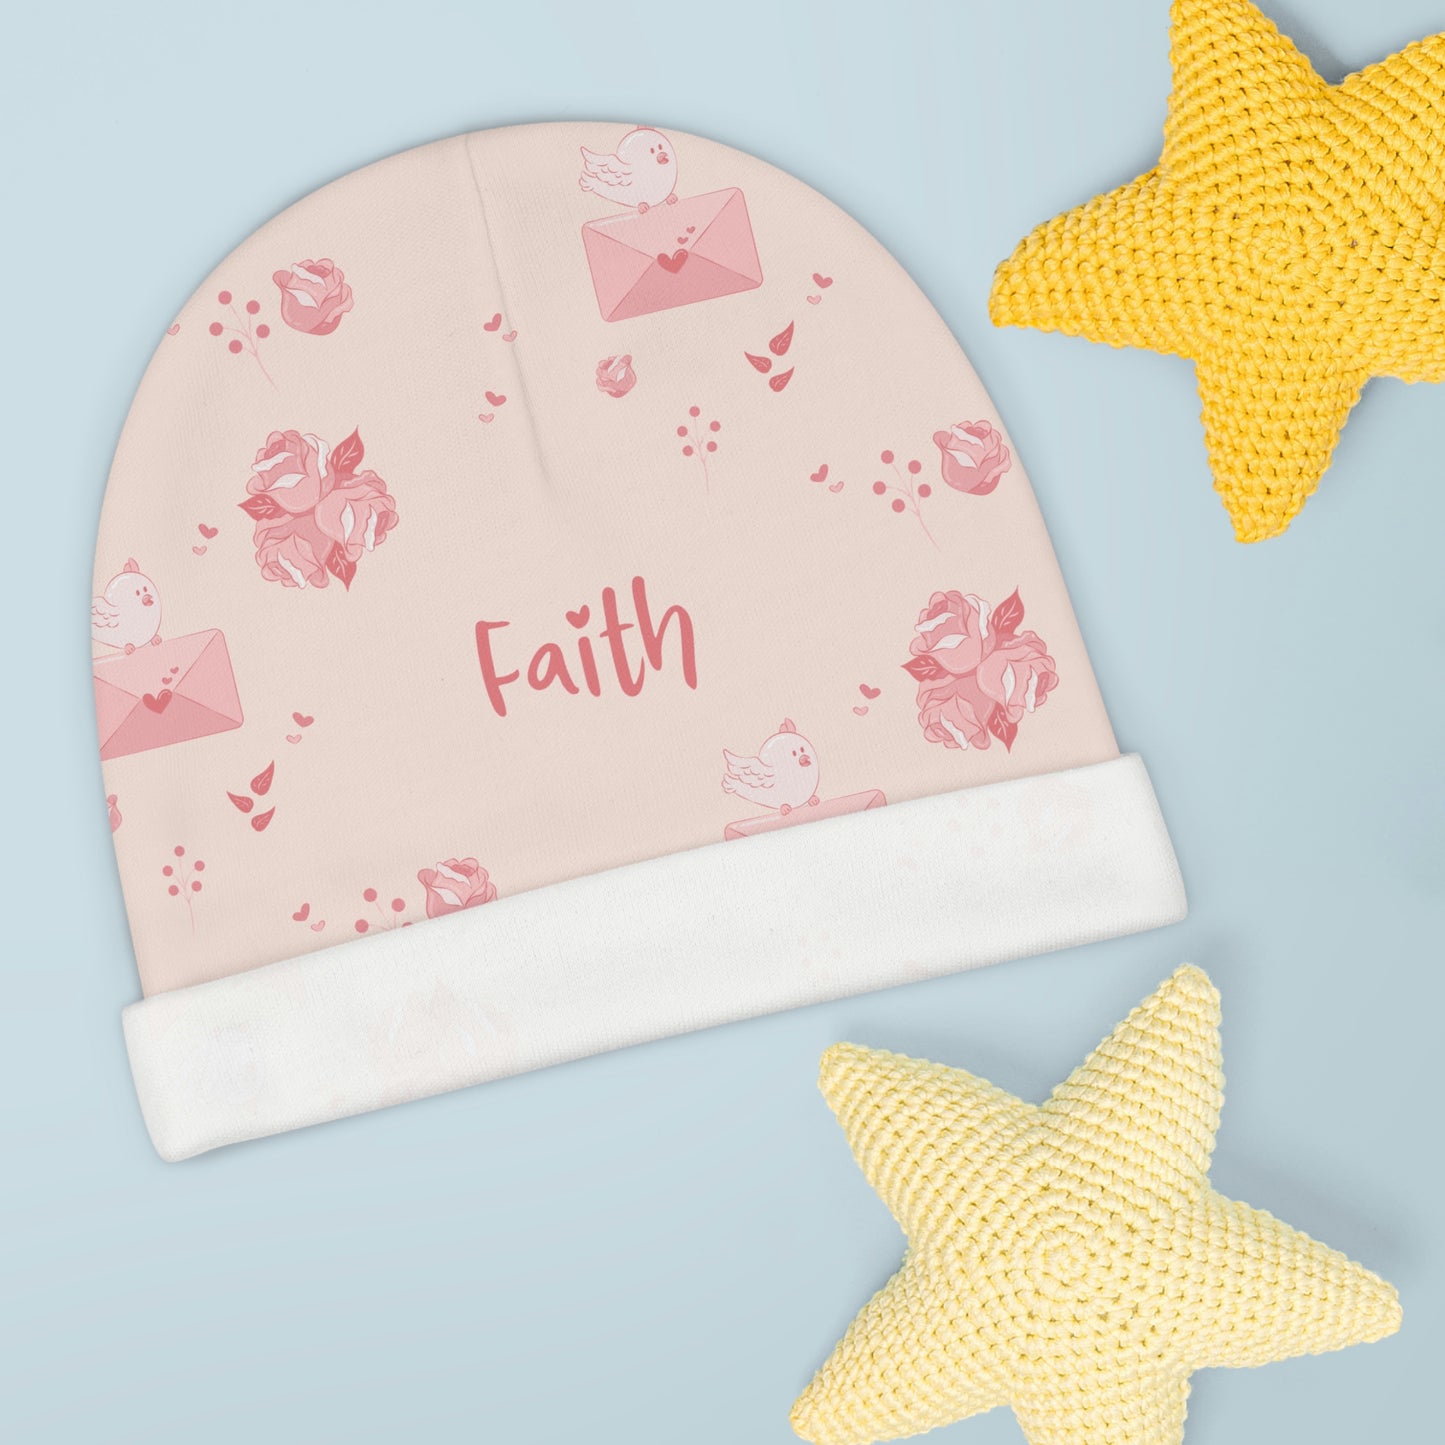 Enveloped in Love Personalized Baby Beanie